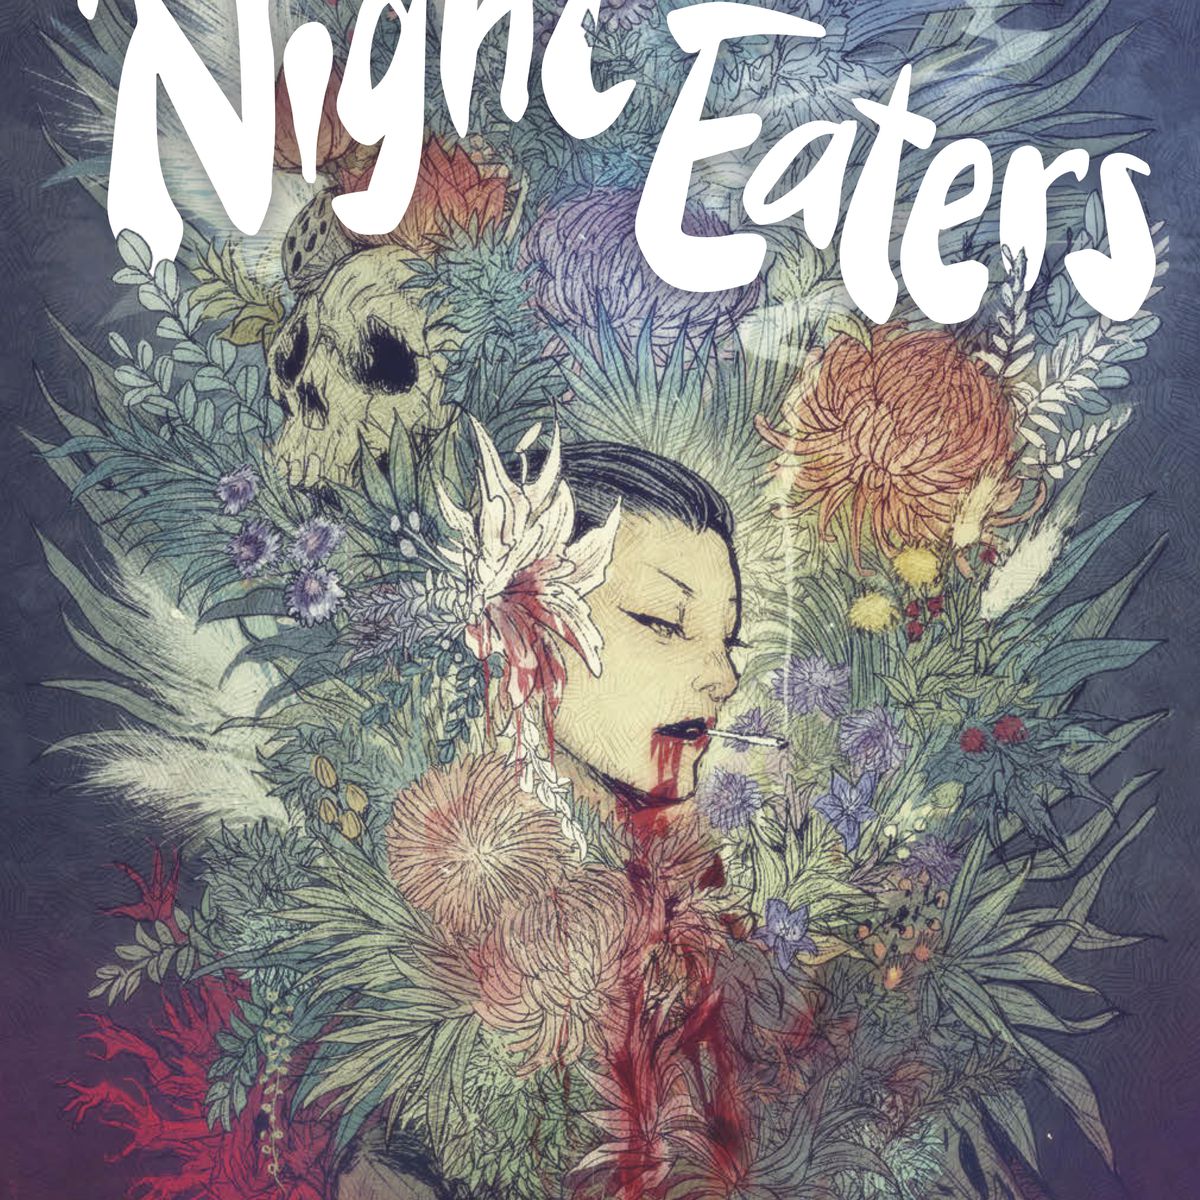 The cover of Night Eaters Book 1: She Eats the Night centers on the head of an Asian woman with a lotus-like blossom in her hair, a cigarette dangling from her lips, and blood running from her mouth, all surrounded by a lush bouquet of flowers, with an embedded skull and a cracked doll, with blood-red roots turning to grasping hands below the bouquet